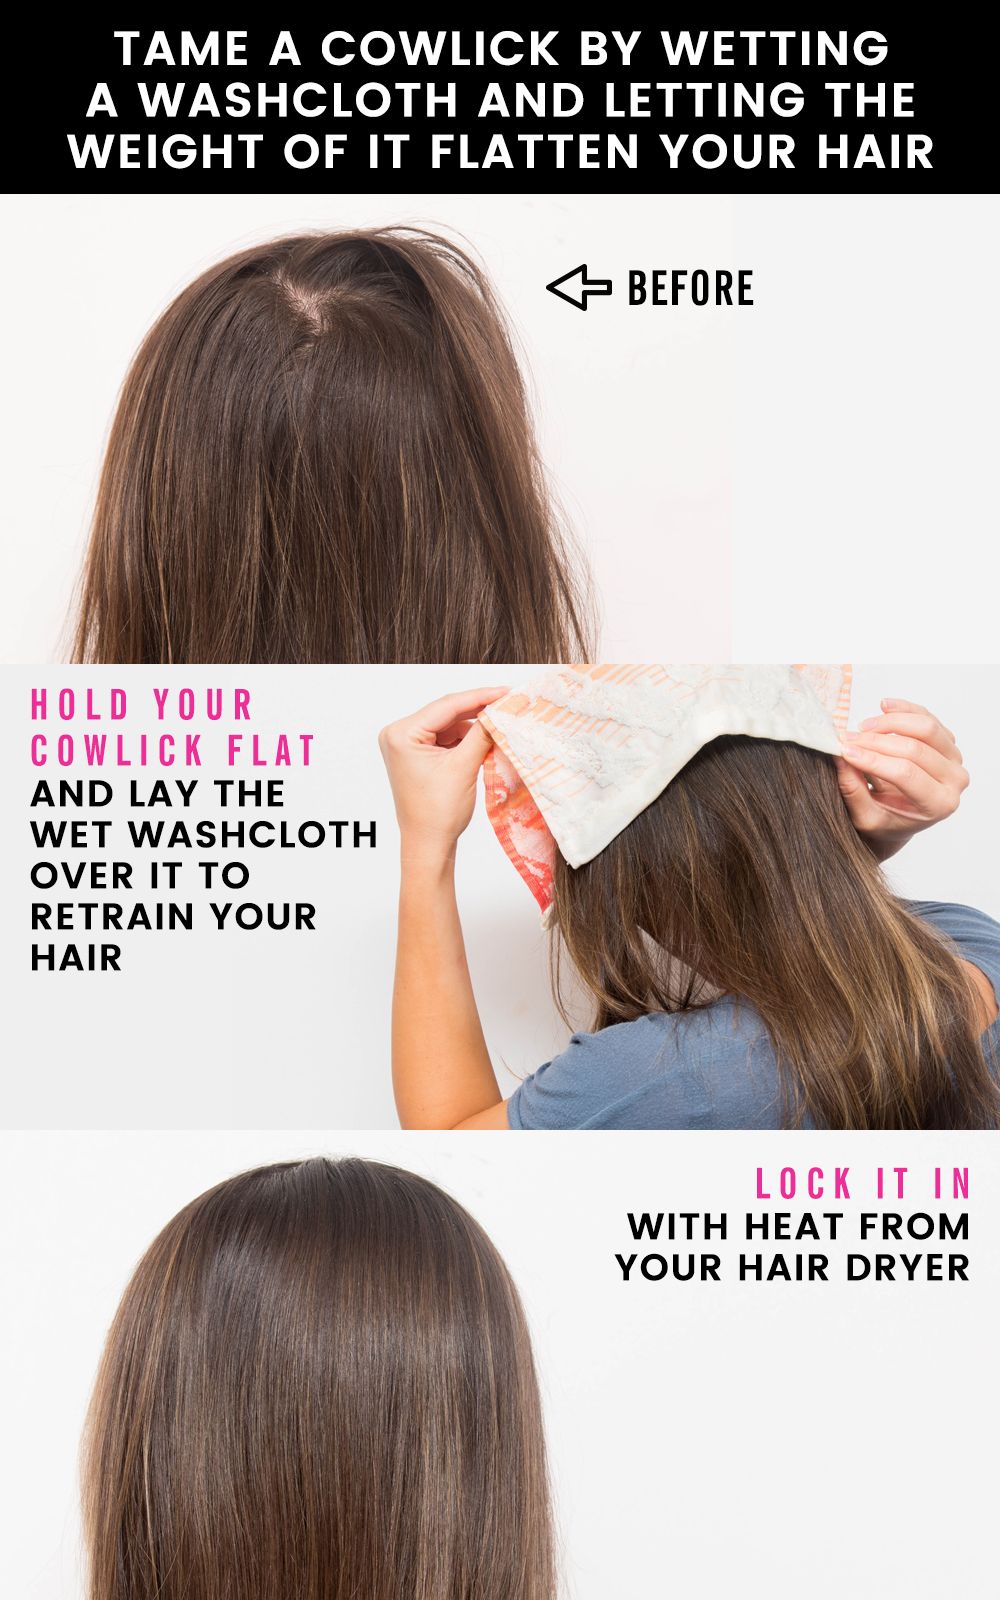 20 Cute and Easy Hairstyles for Greasy Hair That Hide Oily Roots